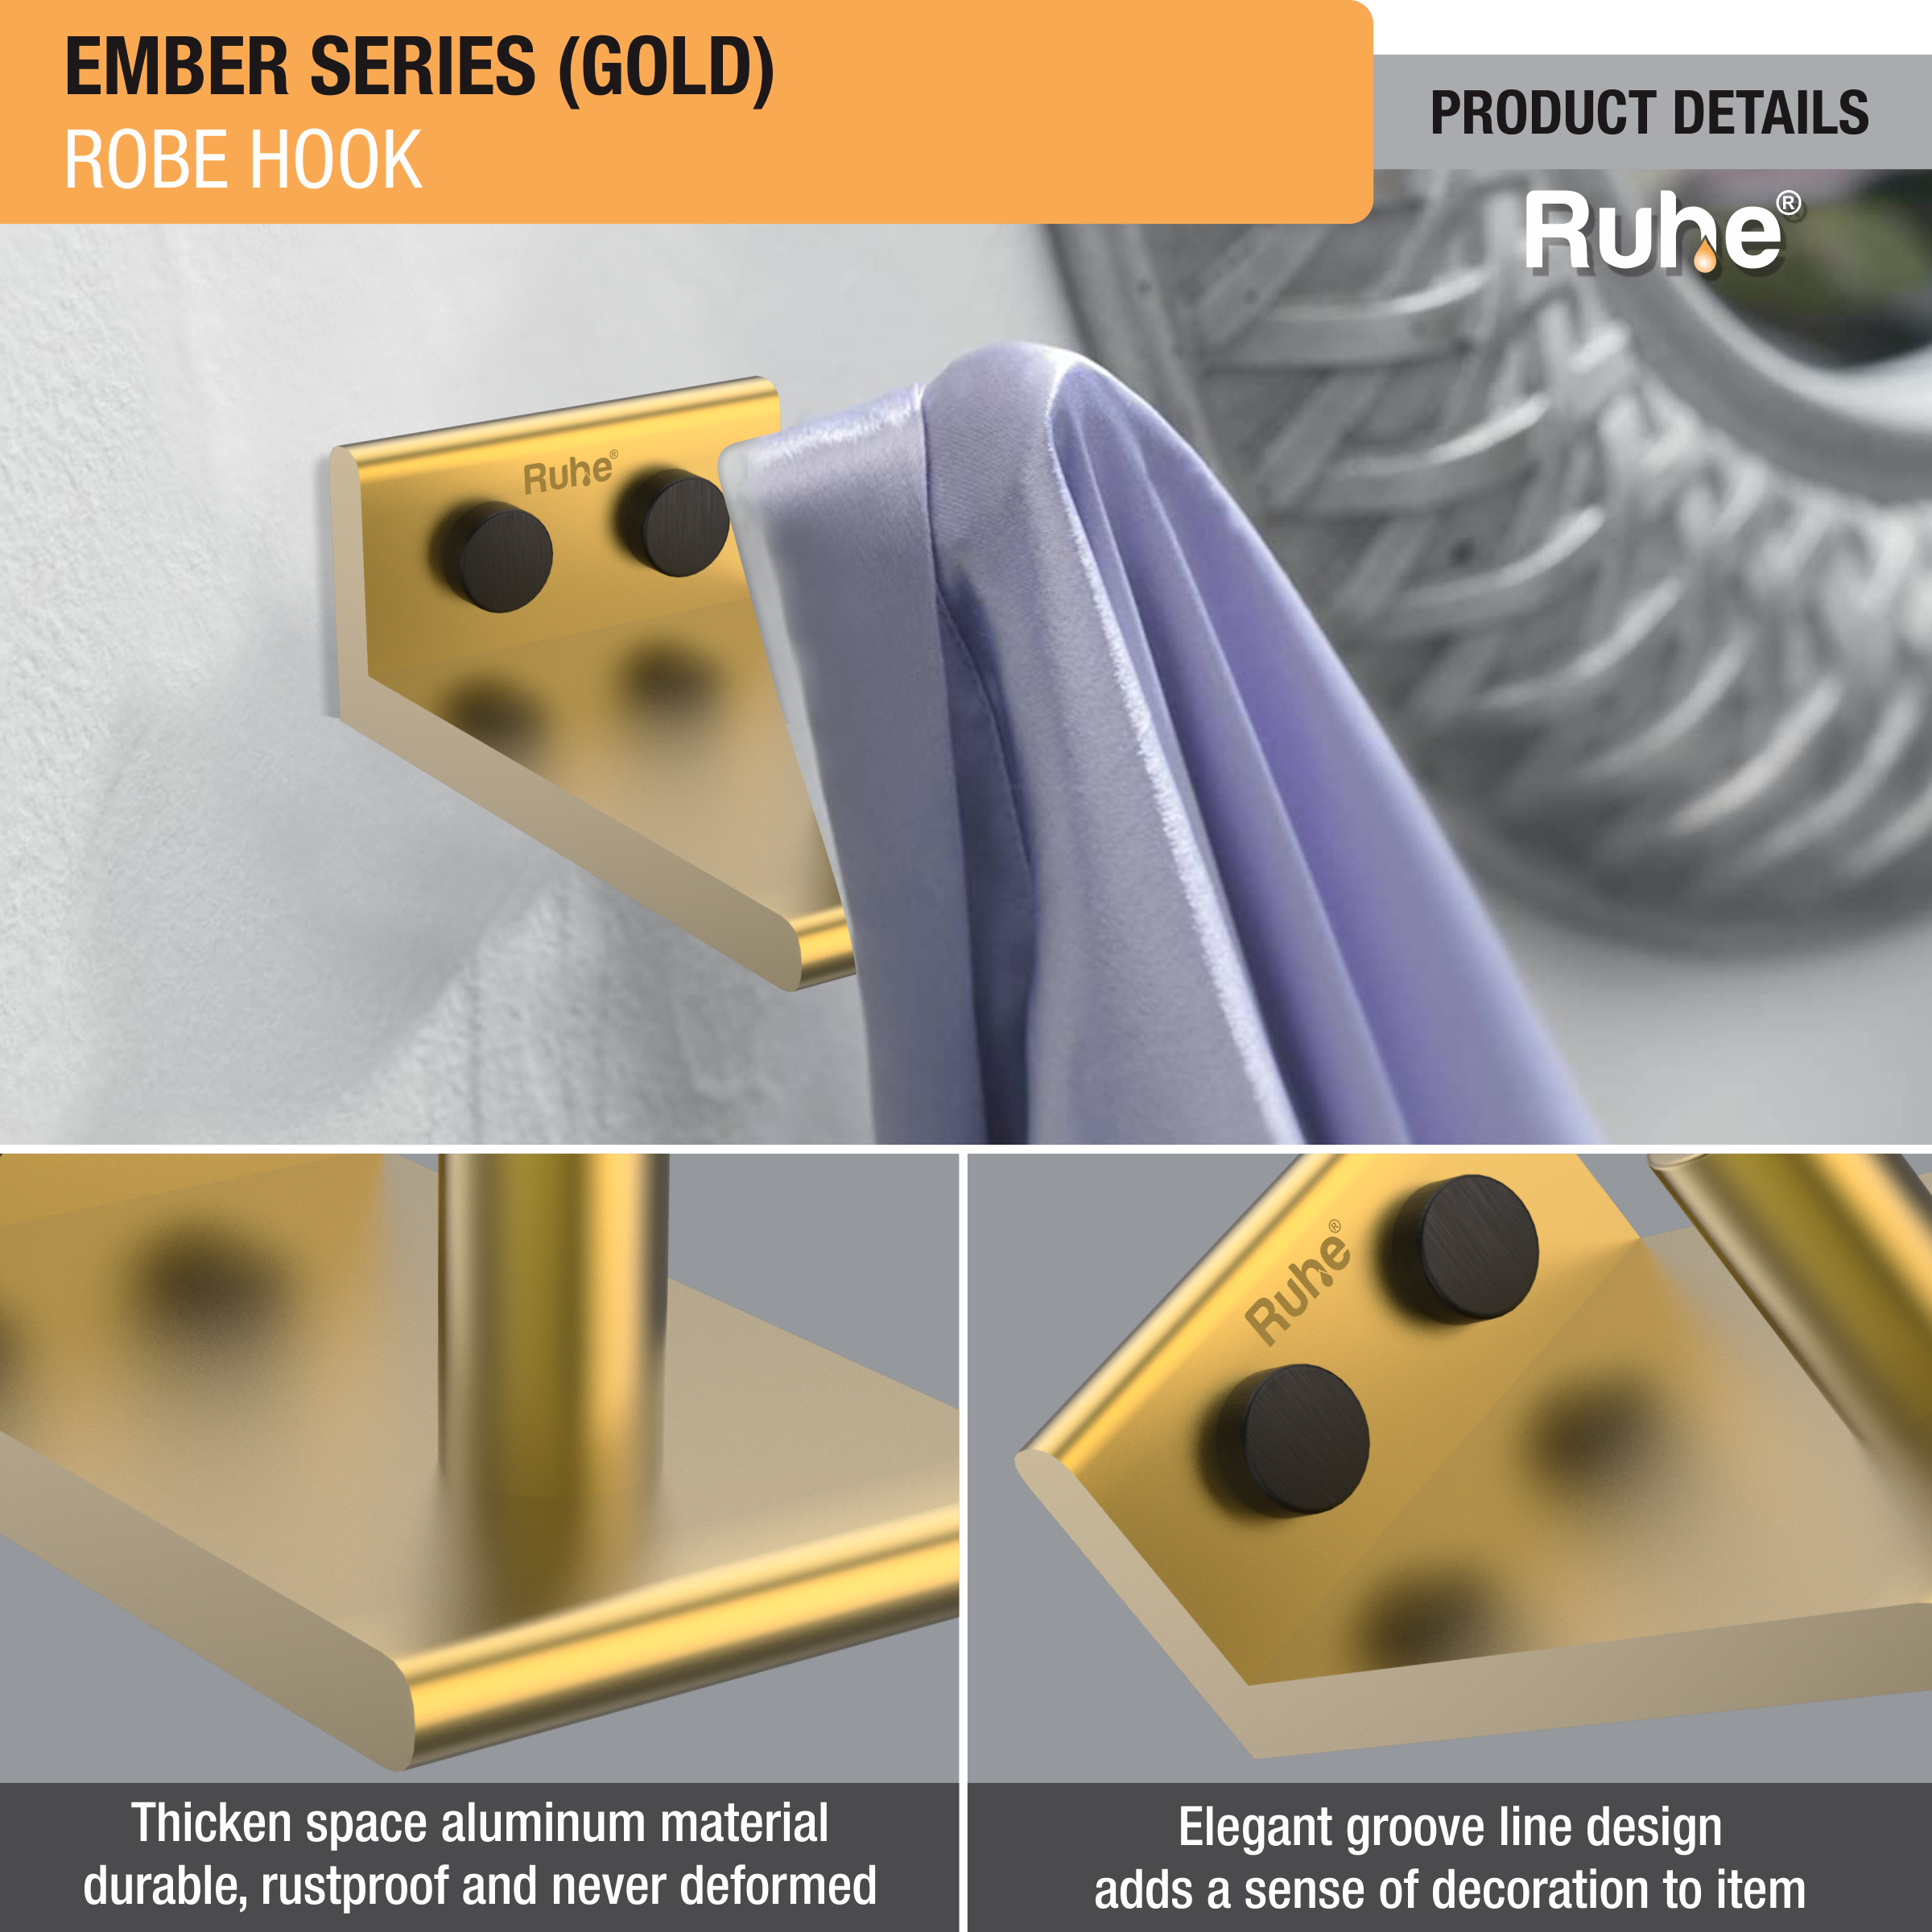 Ember Gold Robe Hook (Space Aluminium) product details